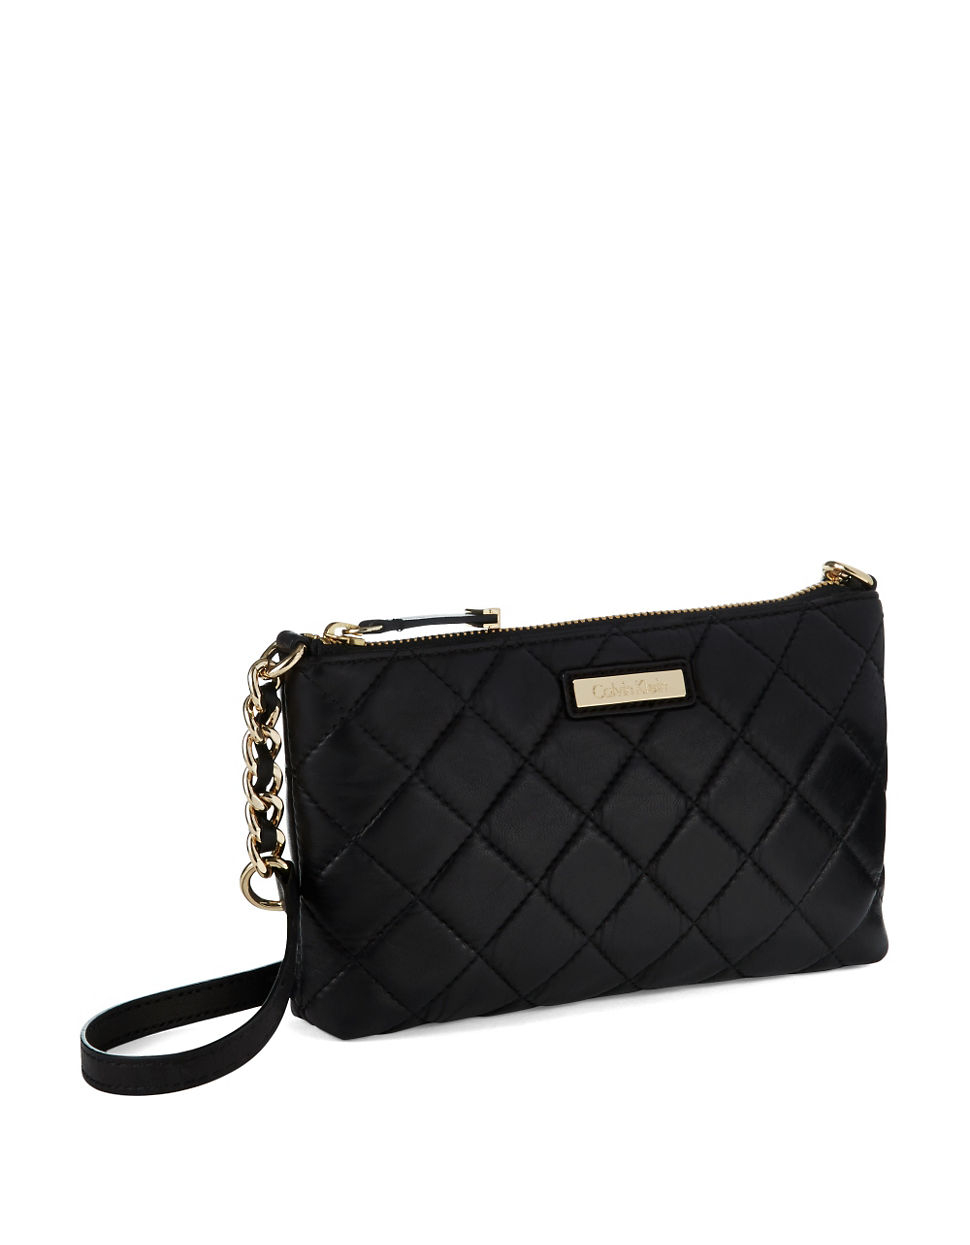 Calvin Klein Quilted Leather Crossbody Bag in Black